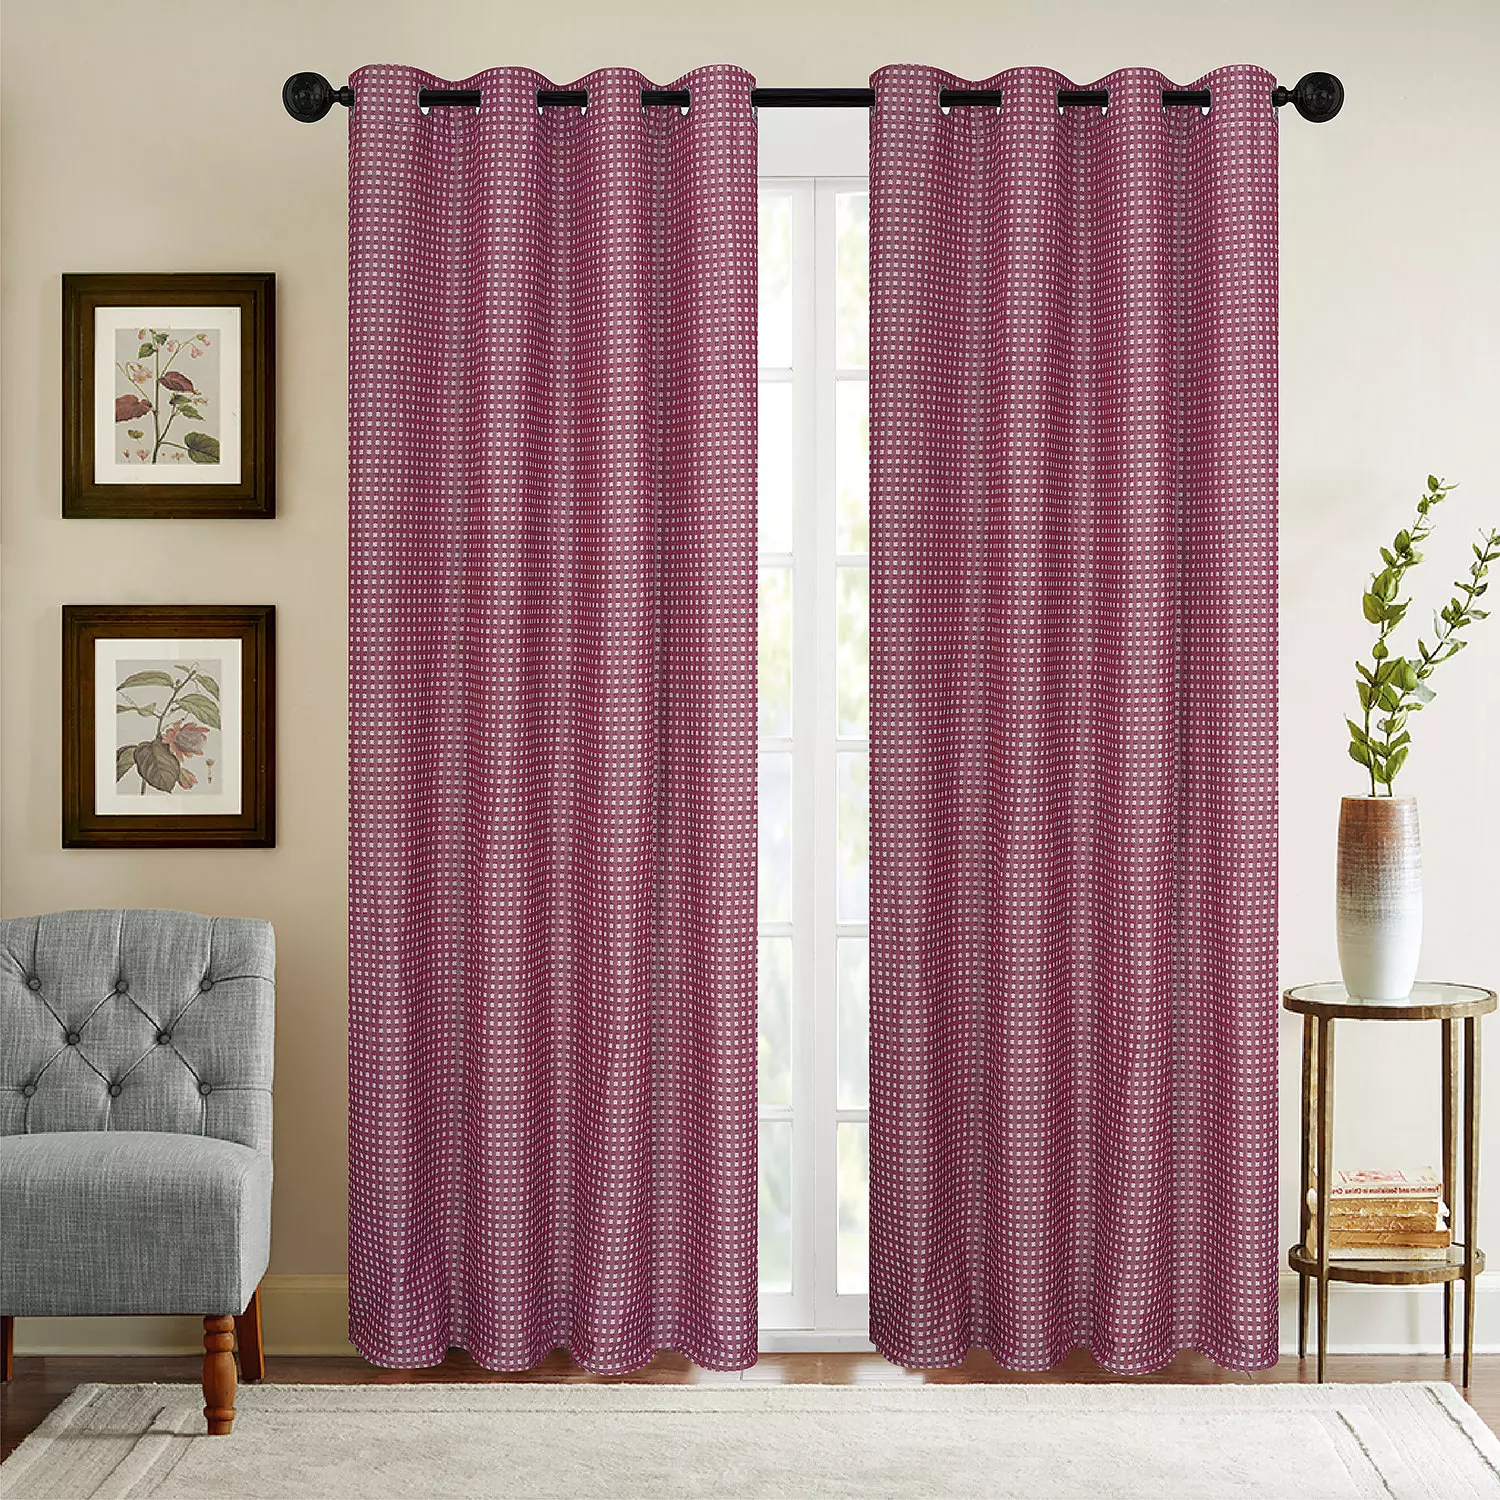 Metrico, jacquard panel with metal grommets in small grid pattern, 54"x84", plum